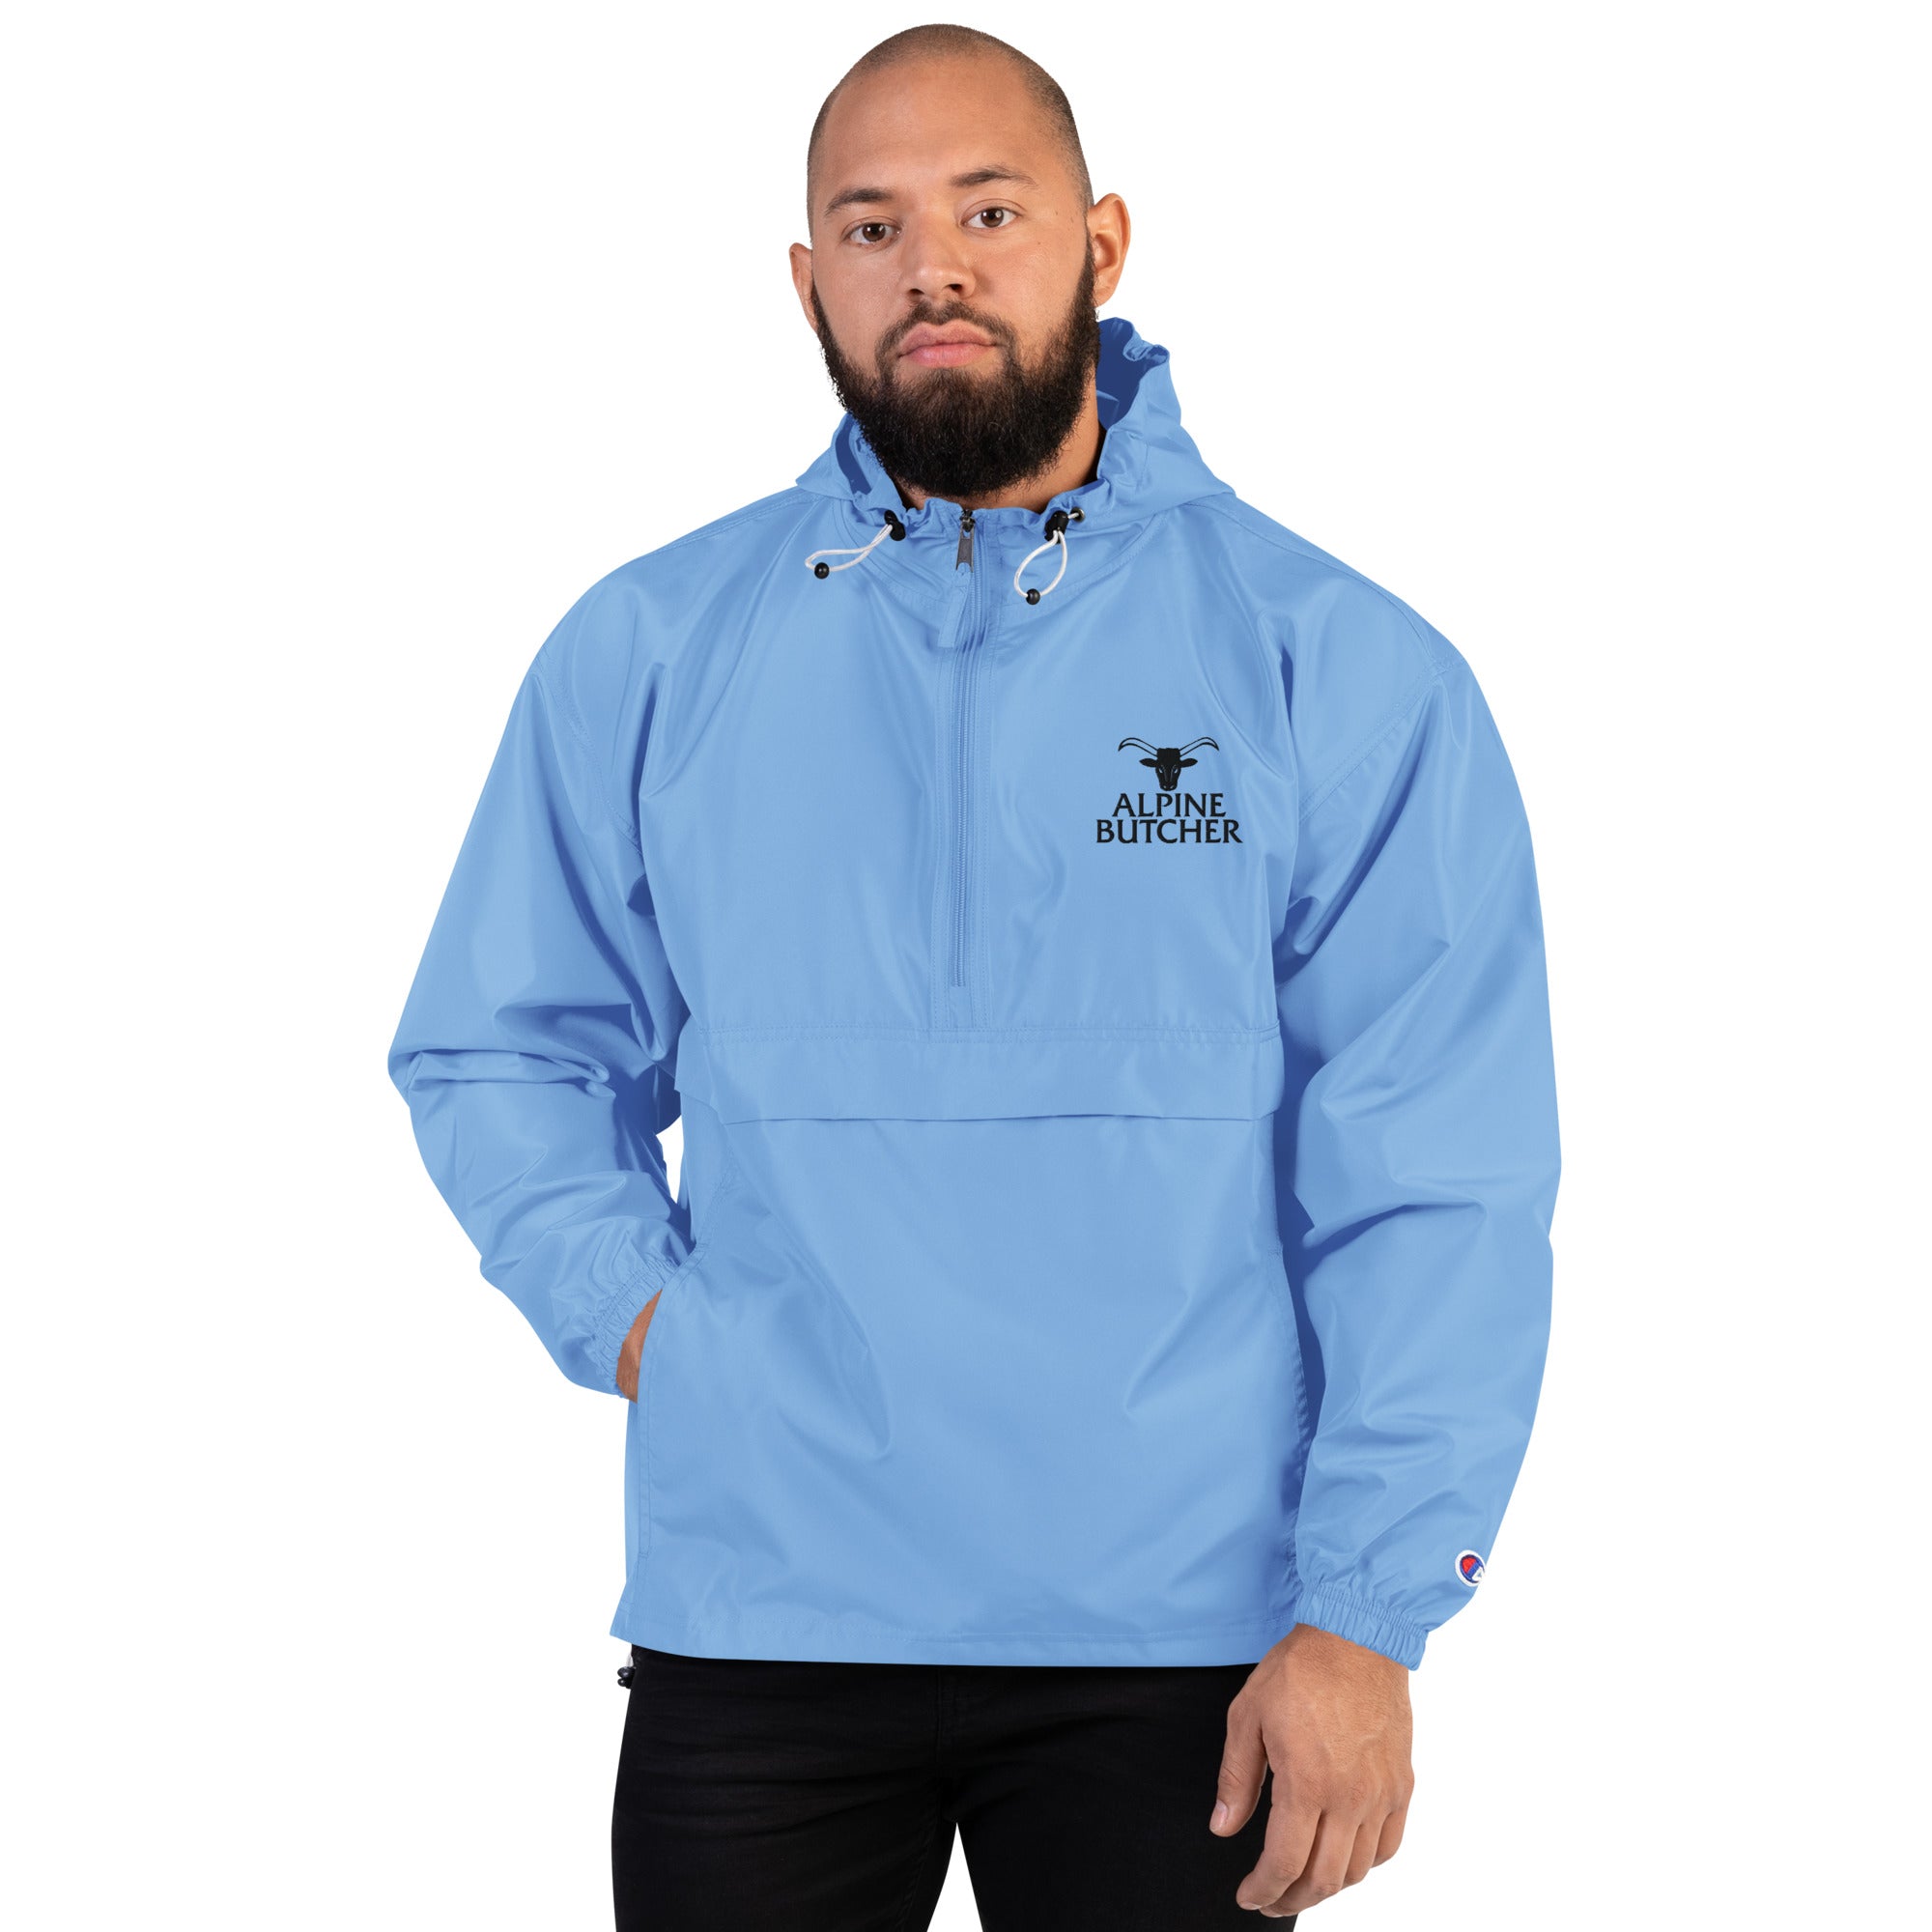 Embroidered Champion Packable Jacket - Alpine Butcher